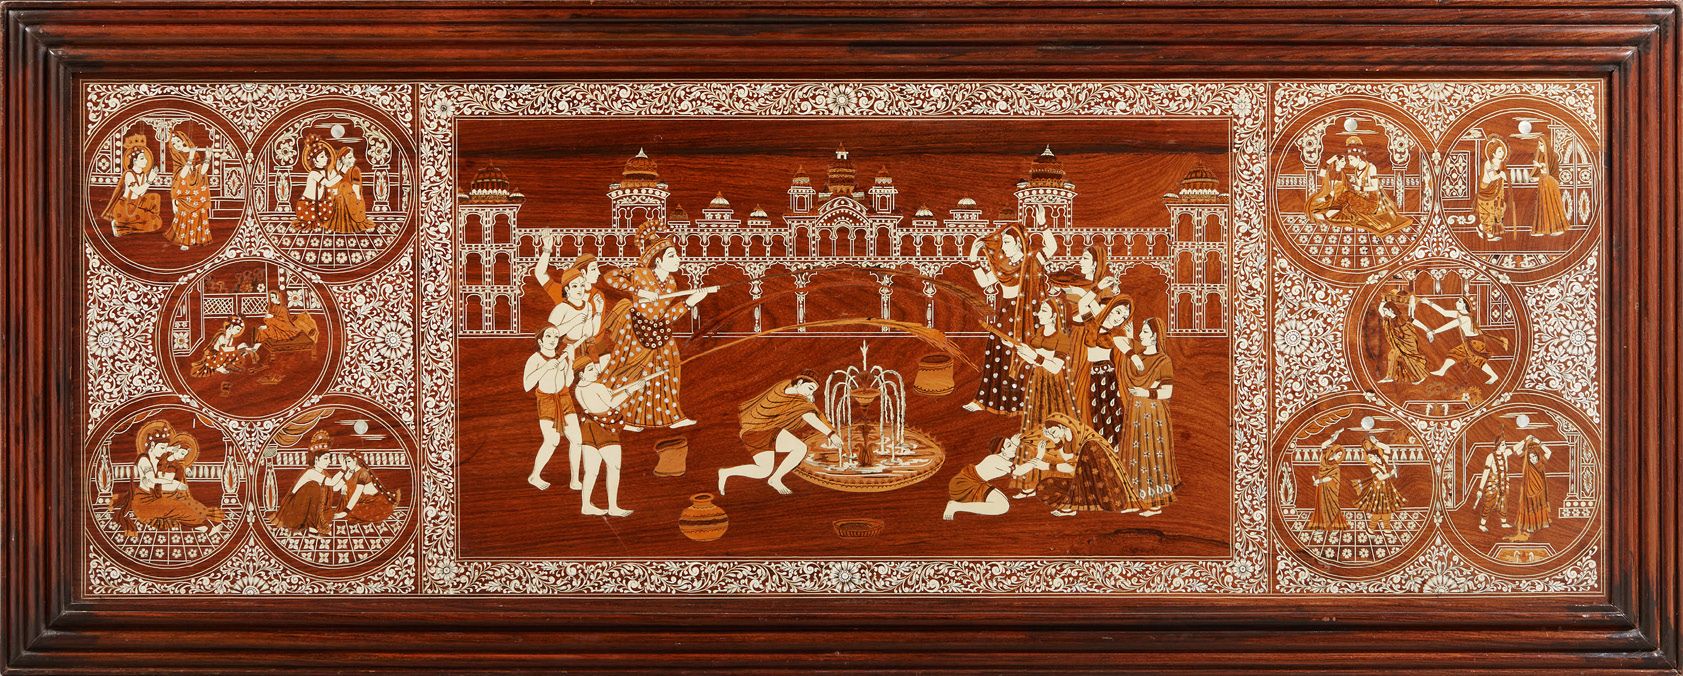 INDE Large wooden panel with bone inlays depicting characters and palace scenes.&hellip;